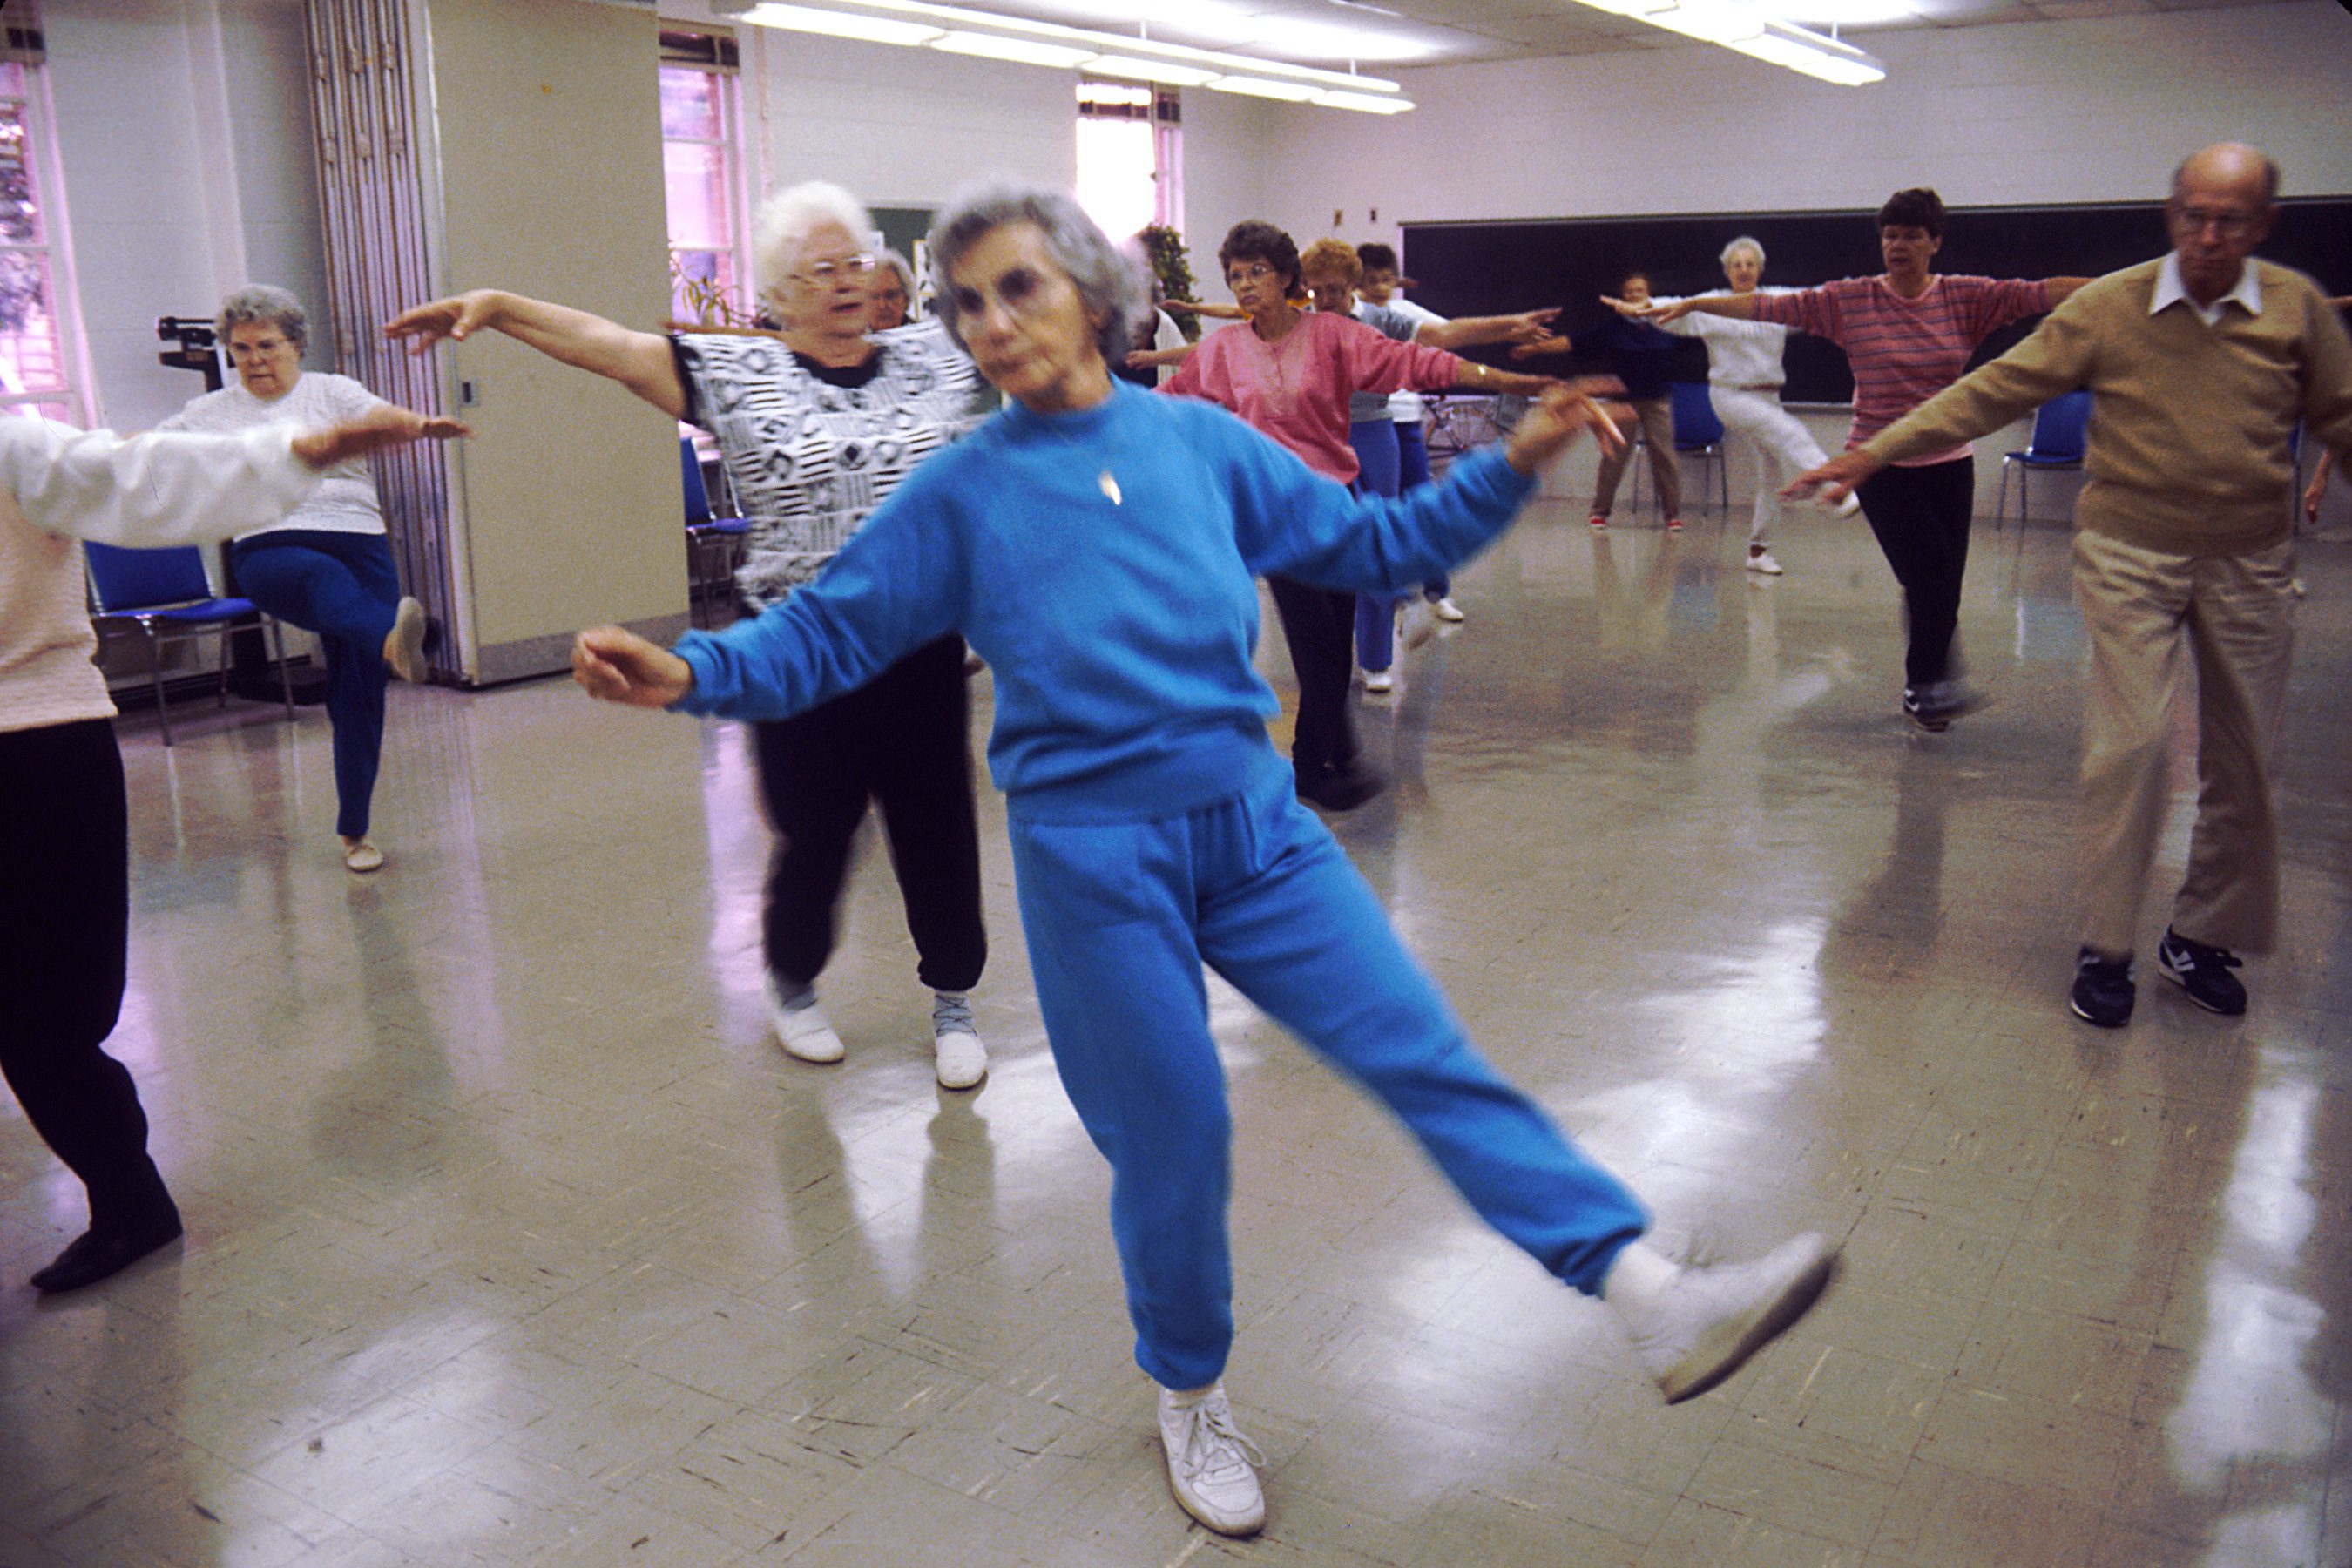 Seniors engaging in aerobics, not only to stay physical active, but mentally as well. Credit: Wikimedia Commons